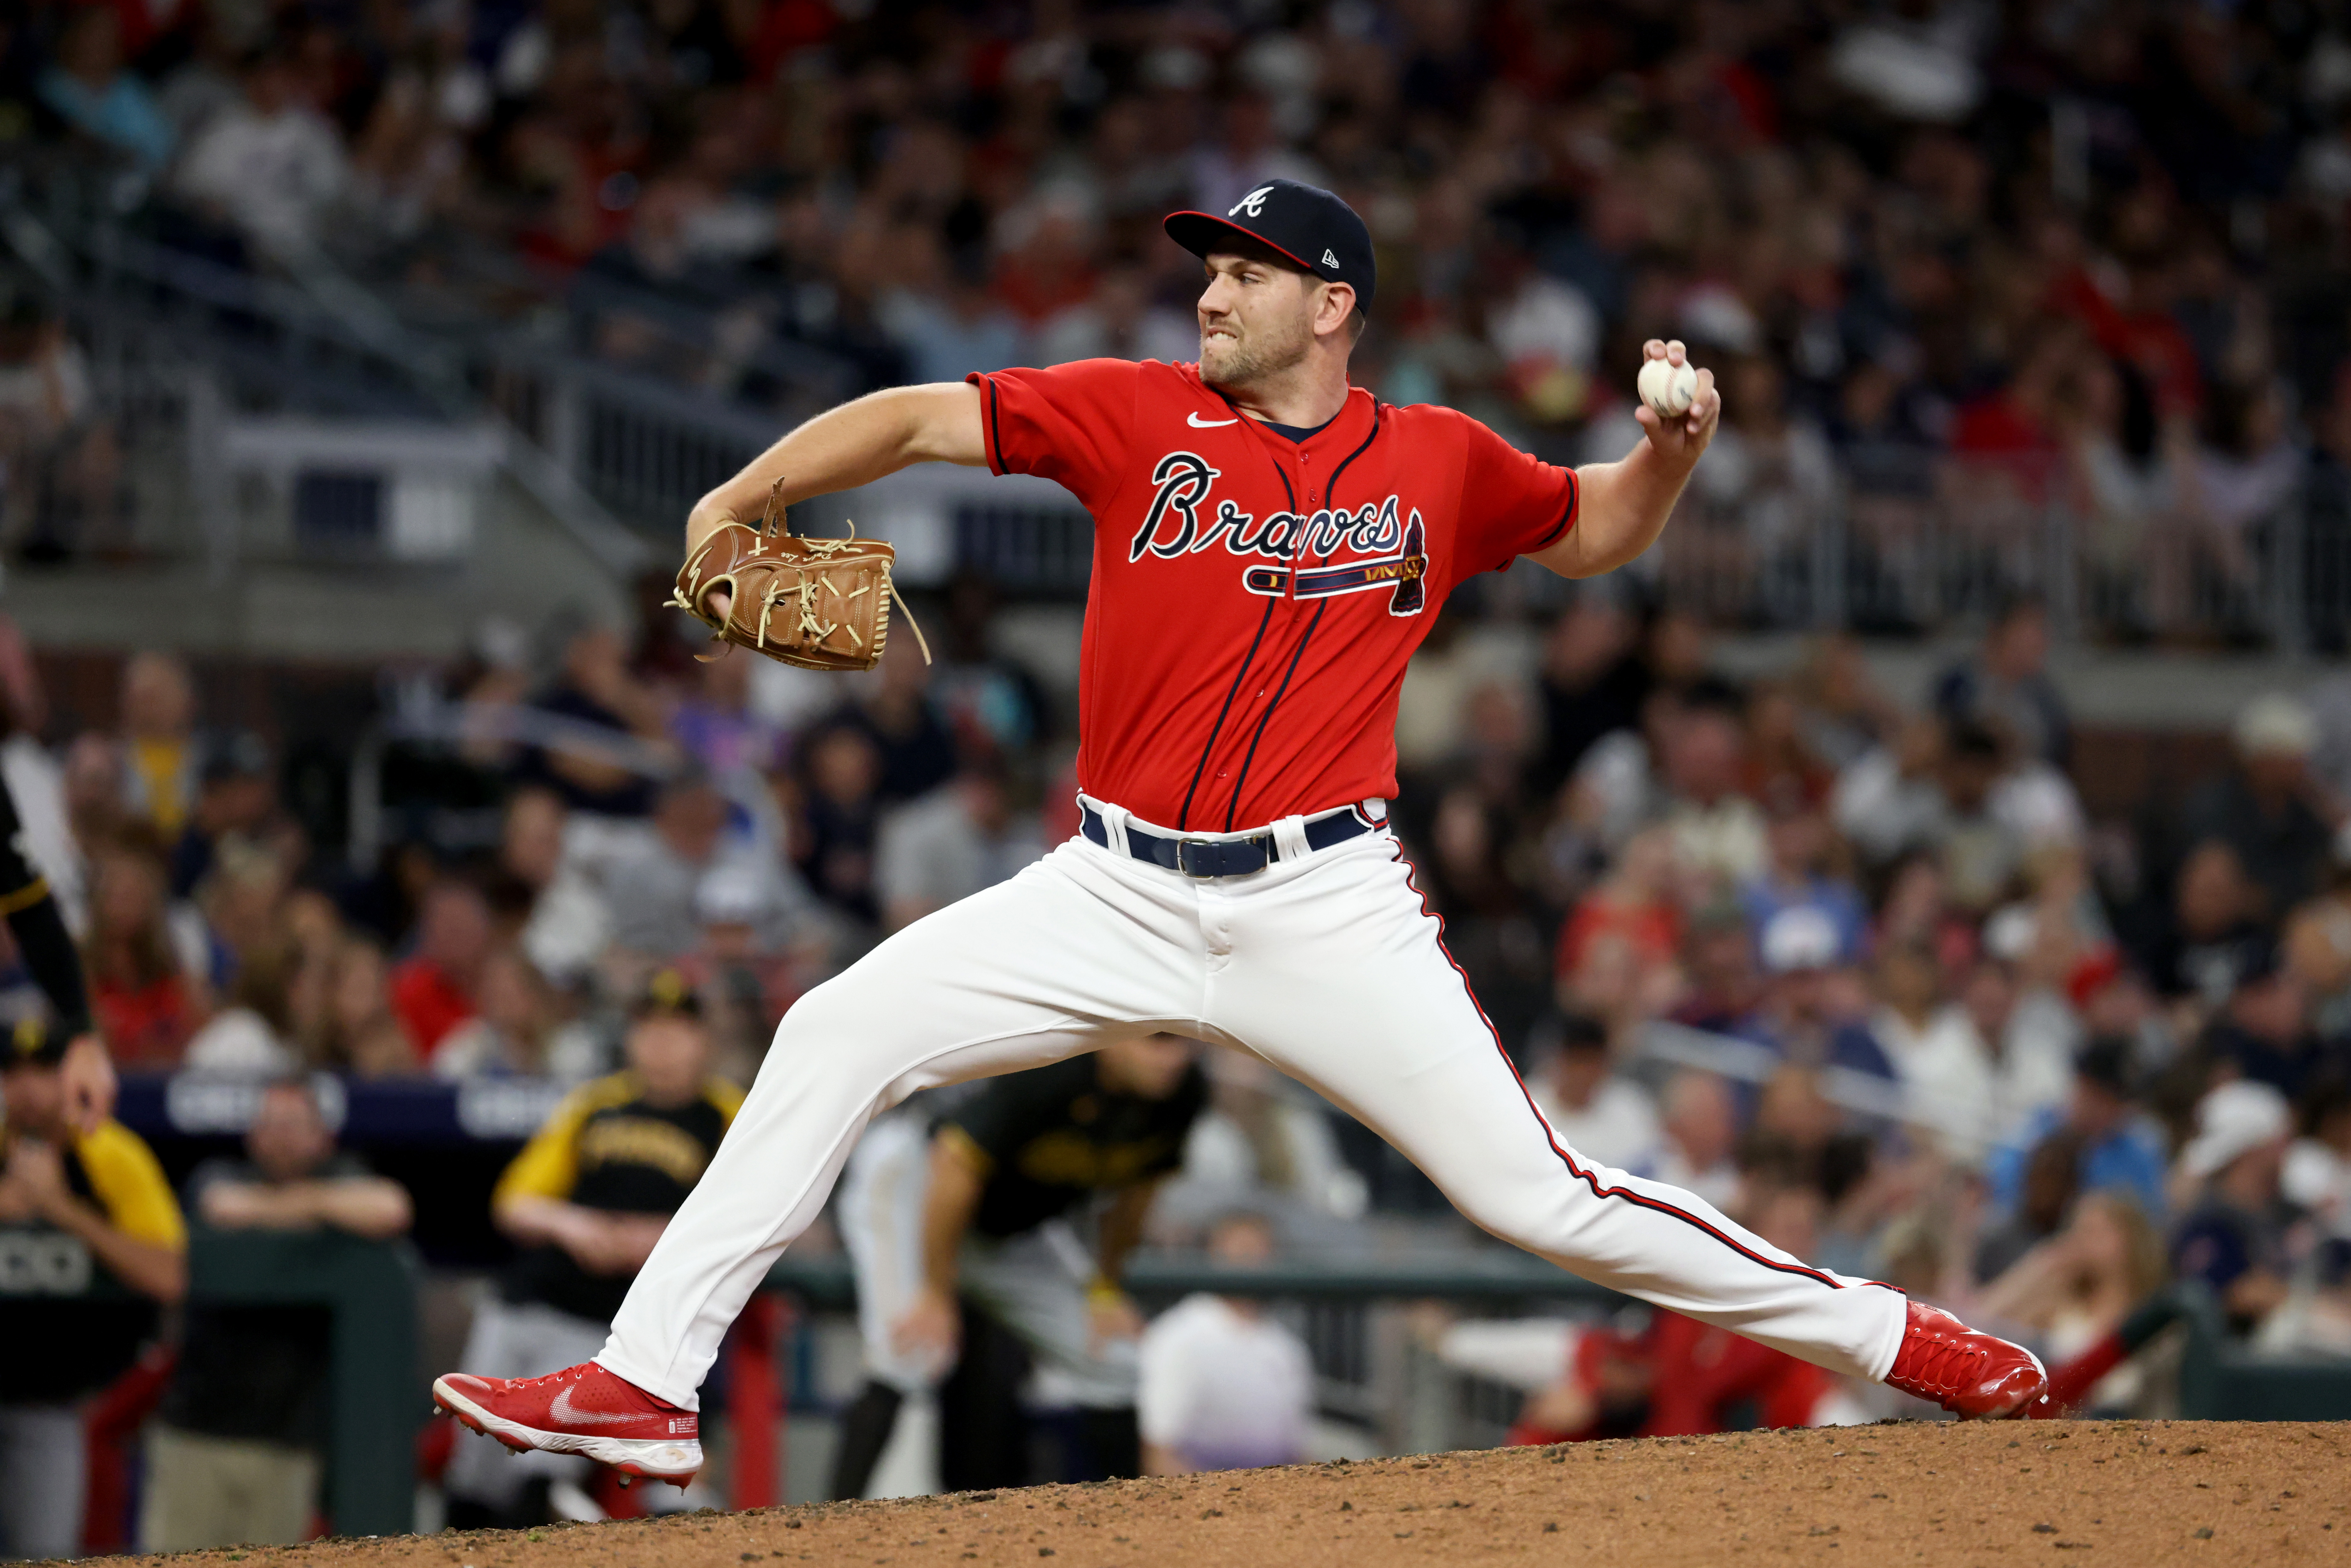 Braves pitcher Dylan Lee far removed from World Series spotlight